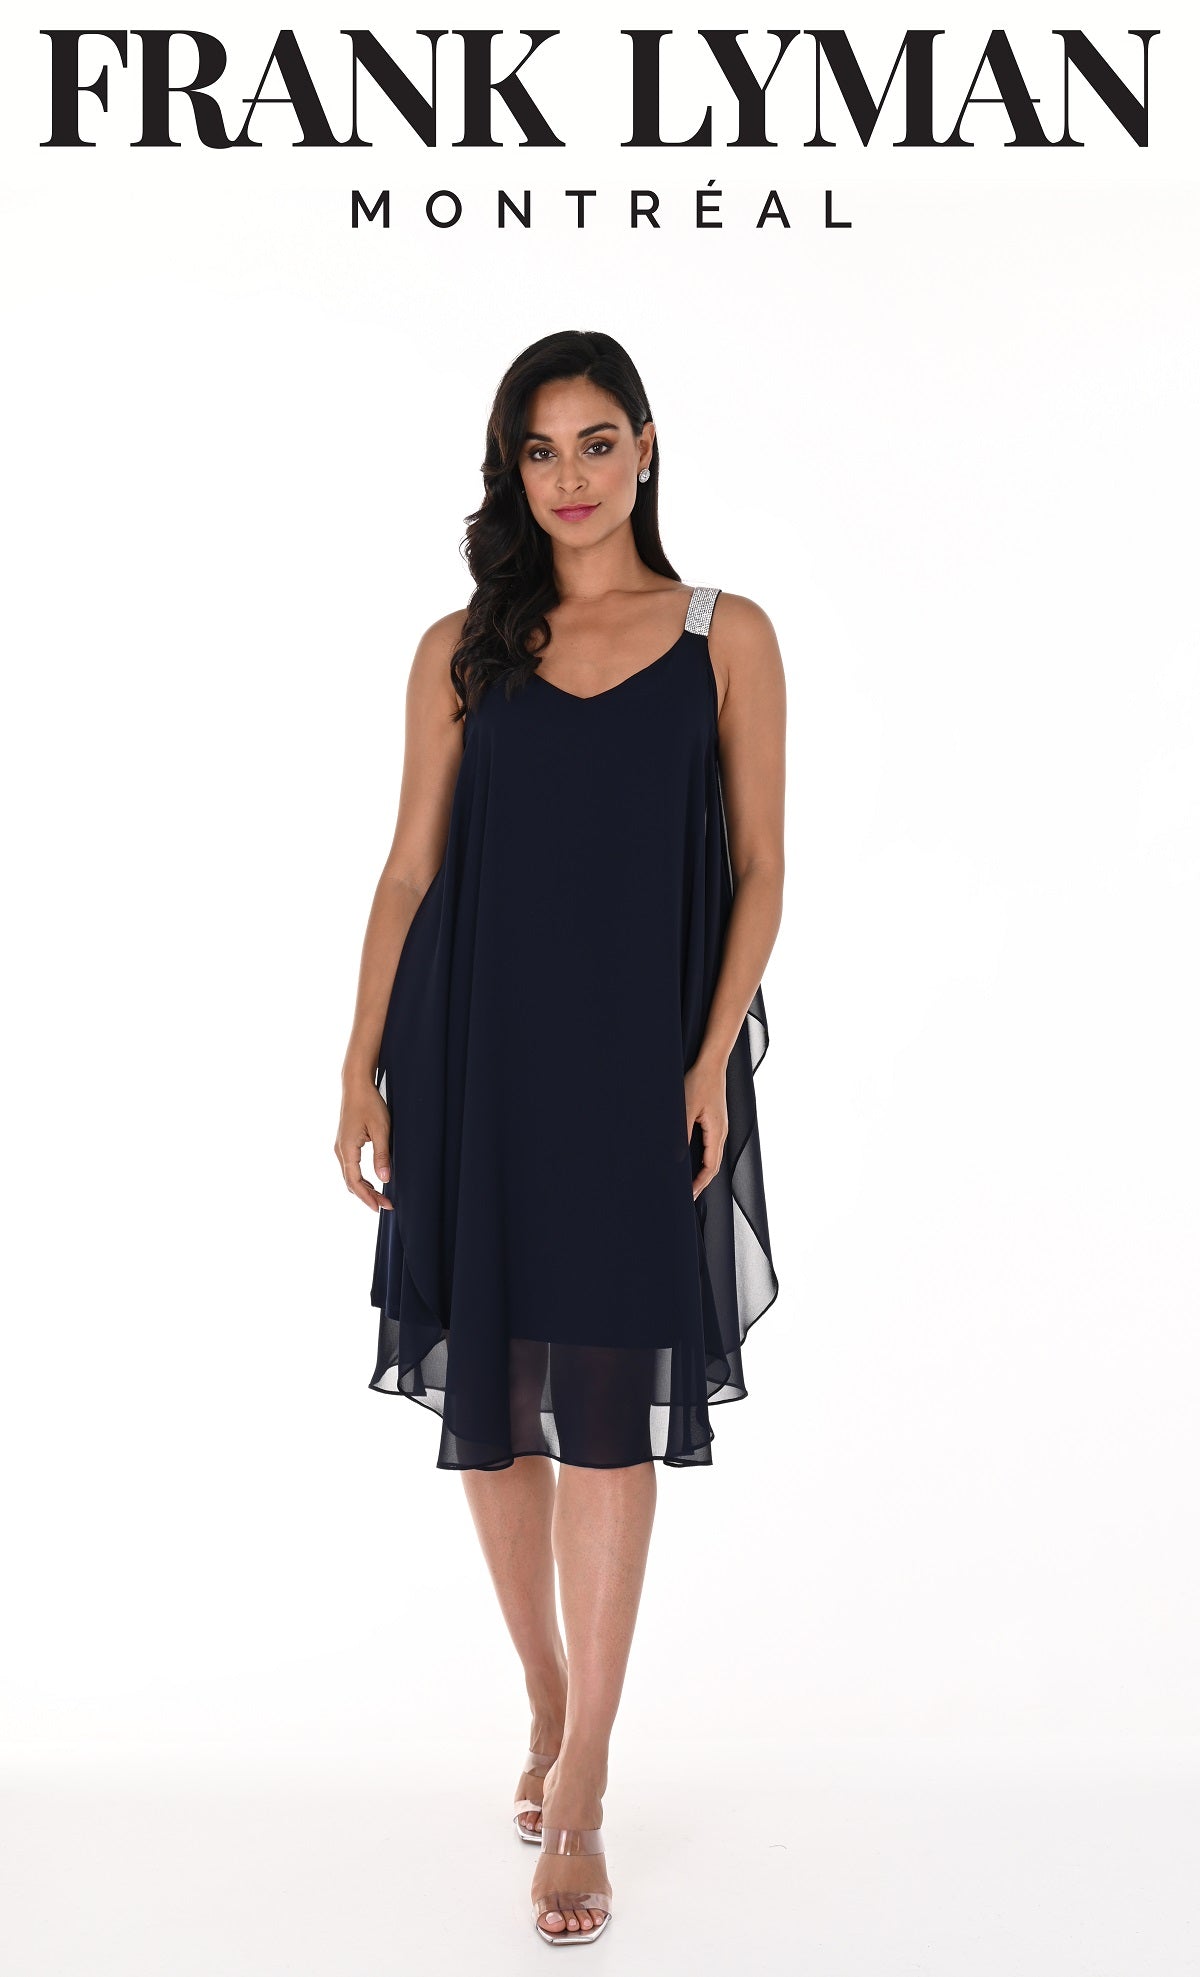 Frank Lyman Montreal Navy Chiffon Cocktail Dress With Open Embellished Shoulder